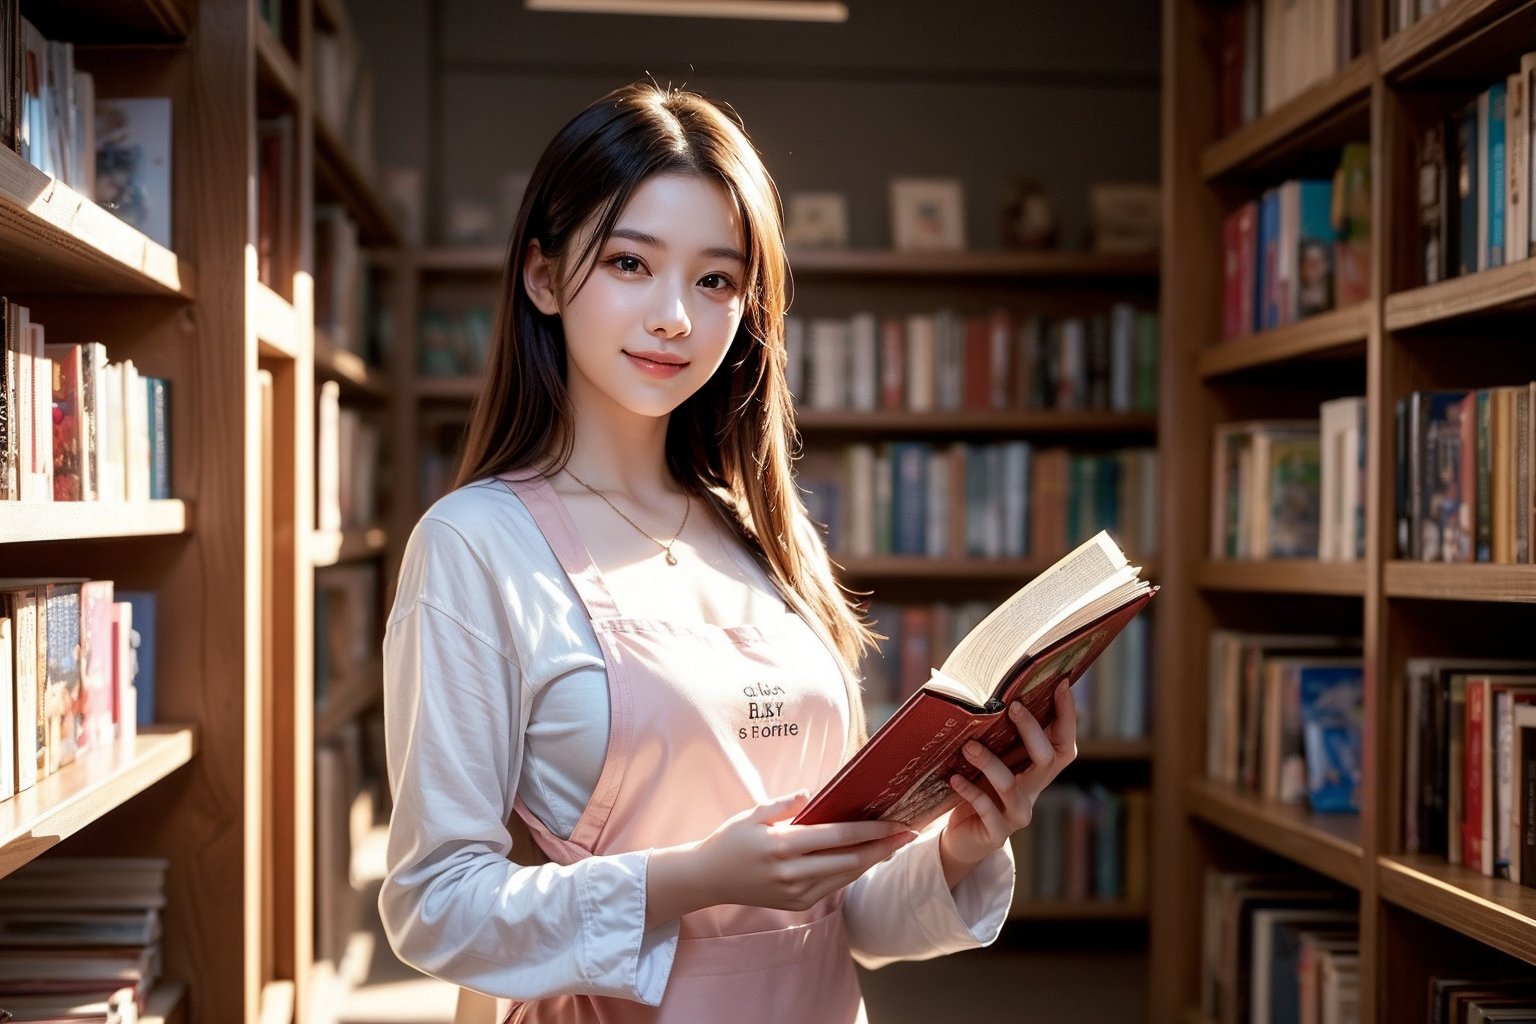 Presents a realistic style. Shot at an ultra-wide angle, the center of the composition is a young woman wearing a white long-sleeved shirt, a dark brown apron, and a gentle smile. Work as a clerk in a large bookstore and carefully organize the books on the shelves. Provides structural elements to the scene. The overall atmosphere is calm and contemplative.